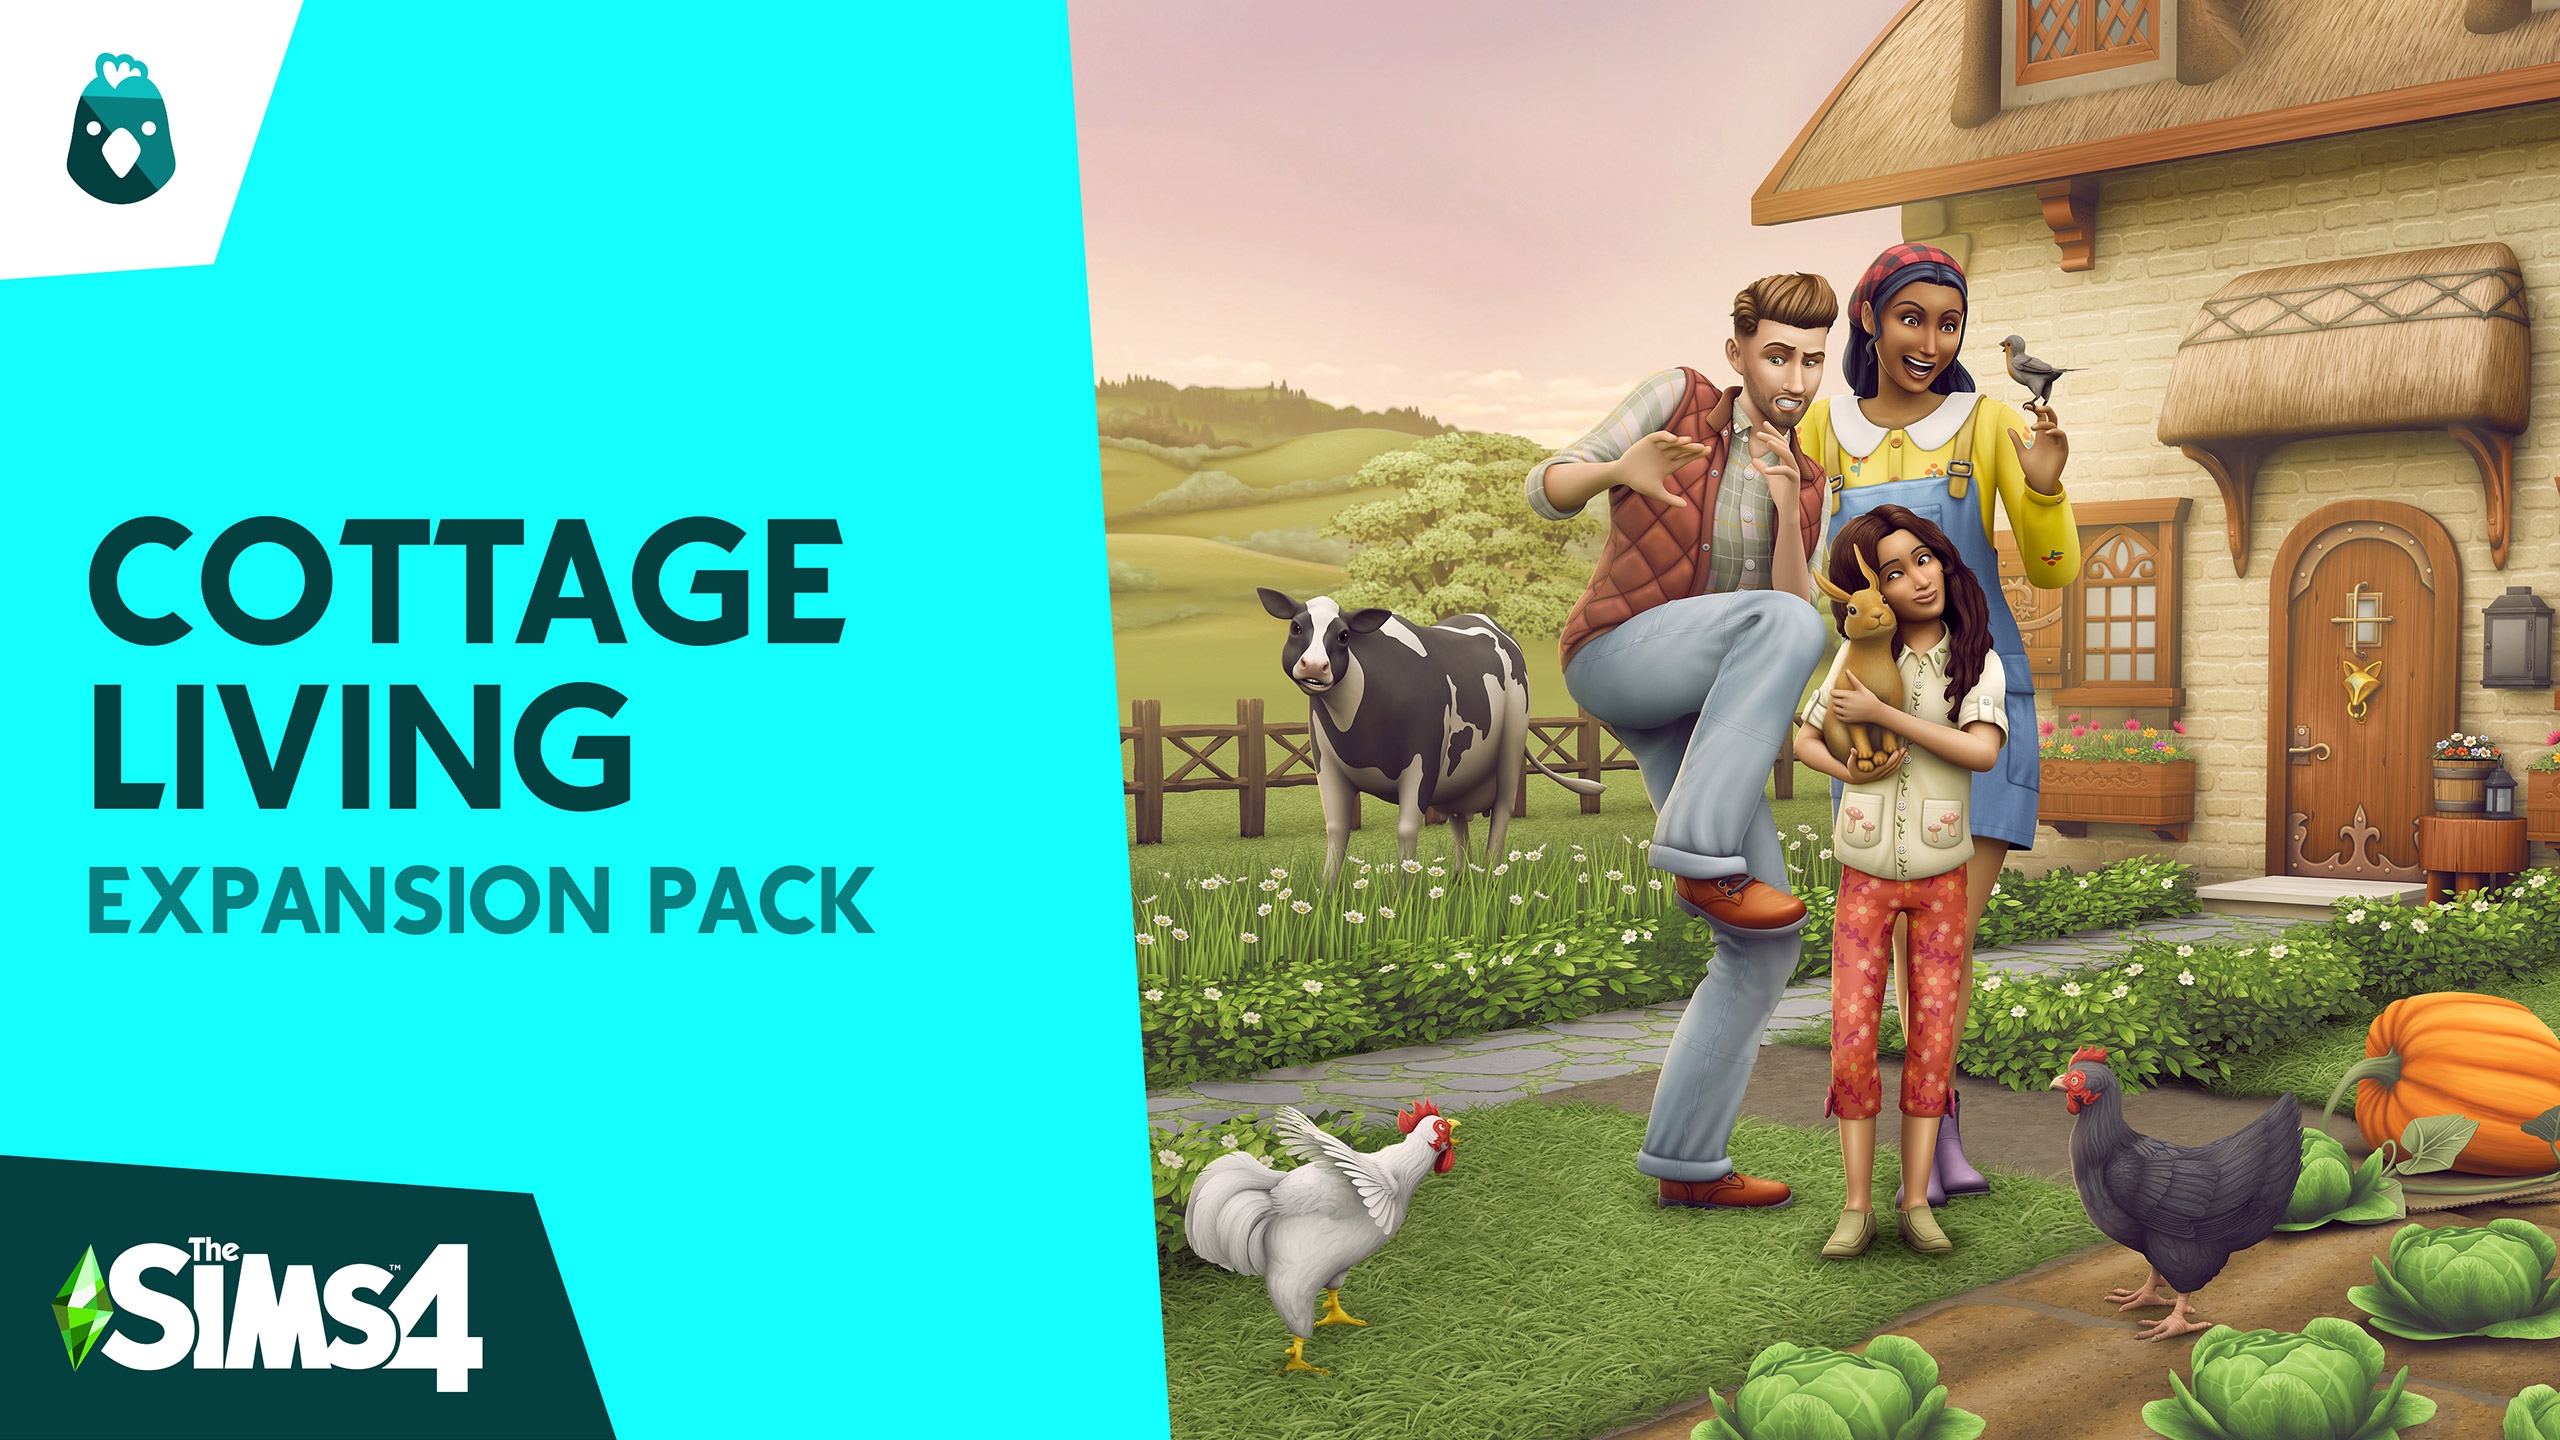 sims 4 new pack